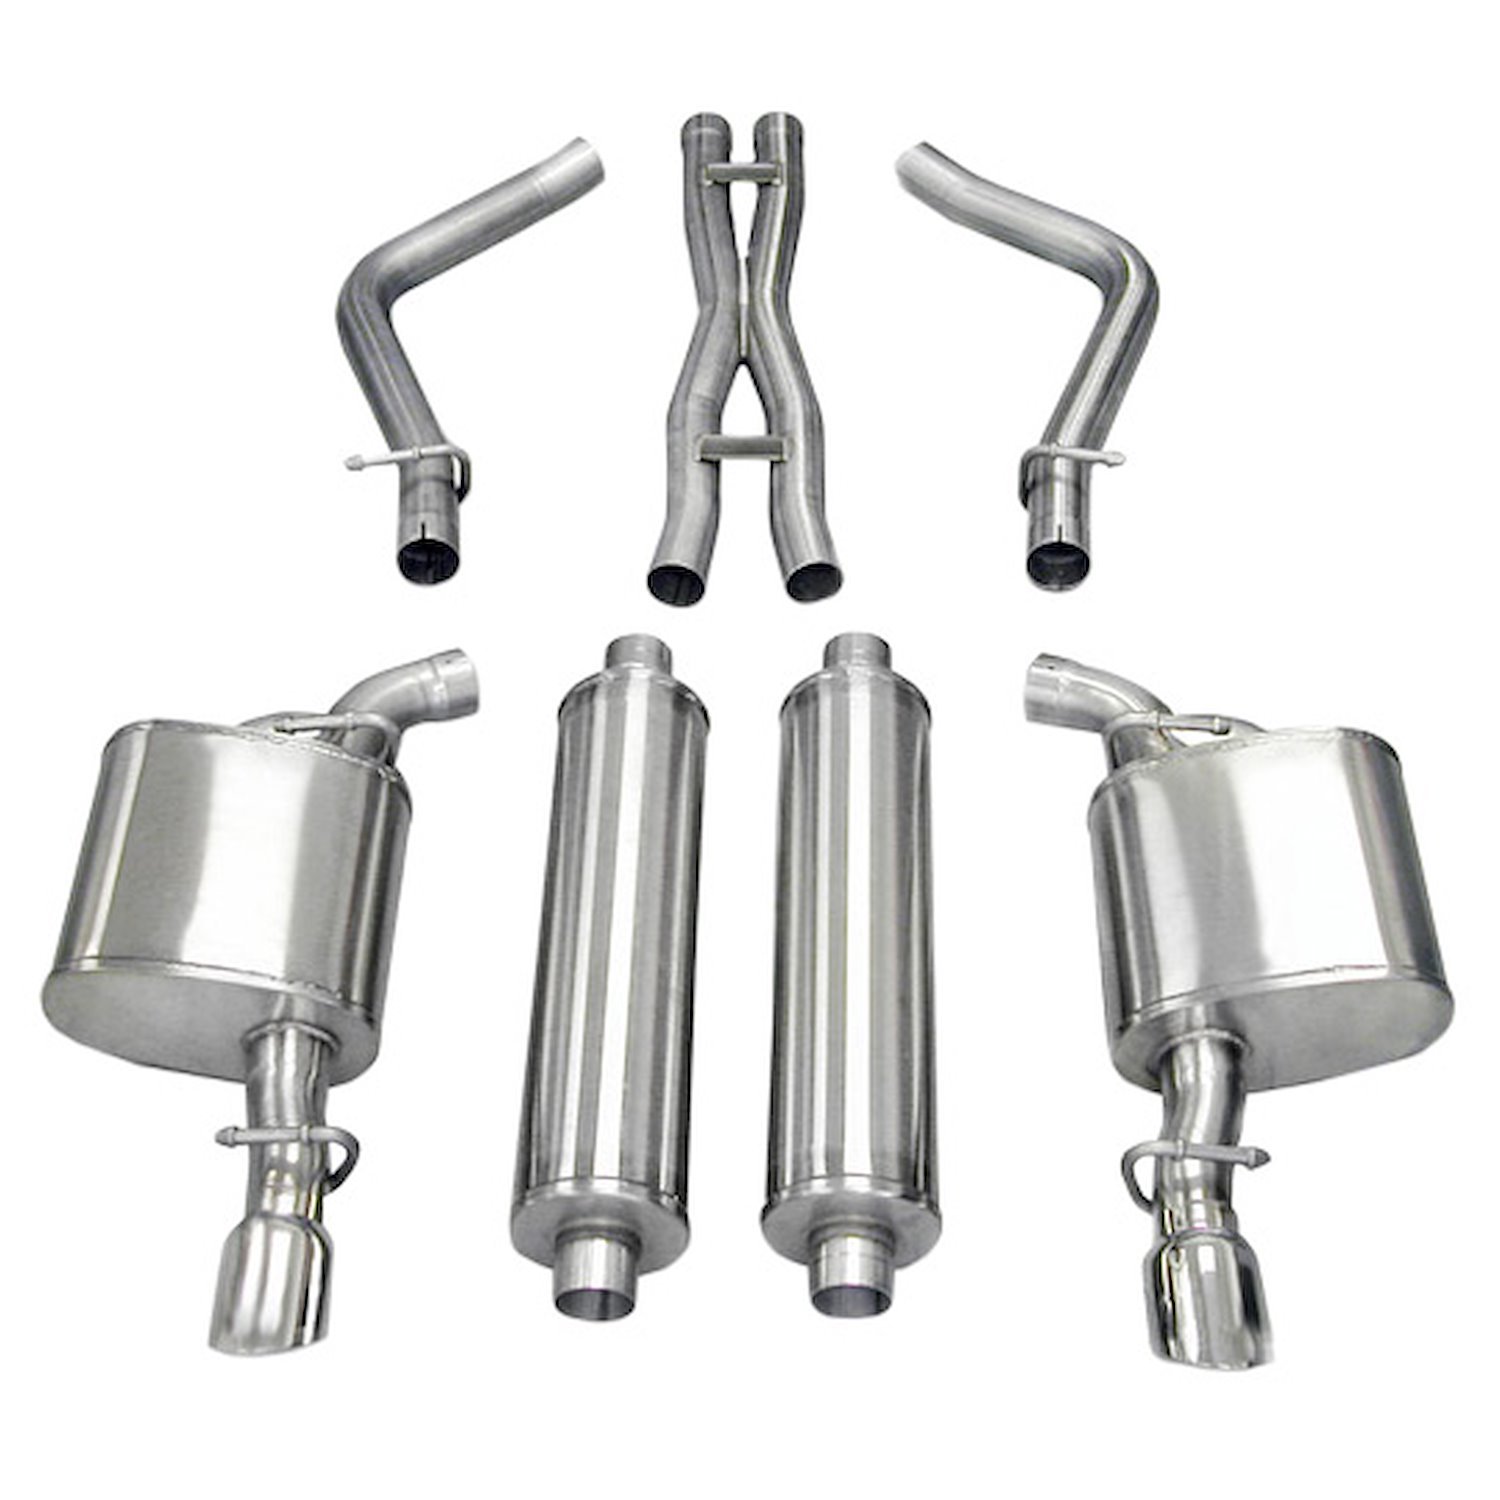 Xtreme Cat-Back Exhaust System 2005-2010 Dodge Charger RT, Magnum RT & Chrysler 300 5.7L